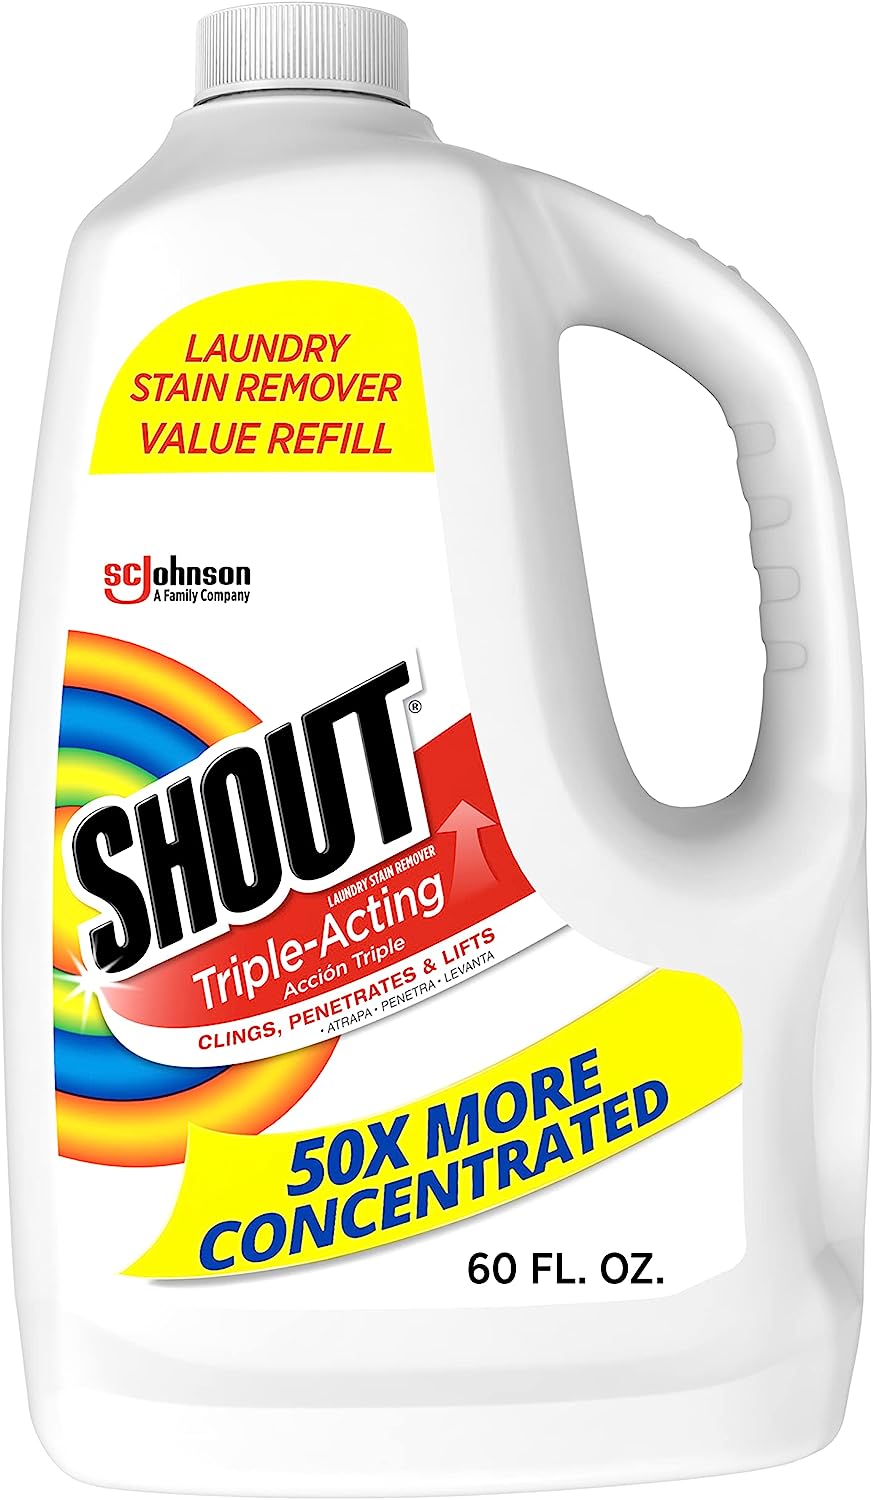 Shout Active Enzyme Laundry Stain Remover Spray, Triple-Acting Formula Clings, Penetrates, and Lifts 100+ Types of Everyday Stains - Prewash Refill 60oz